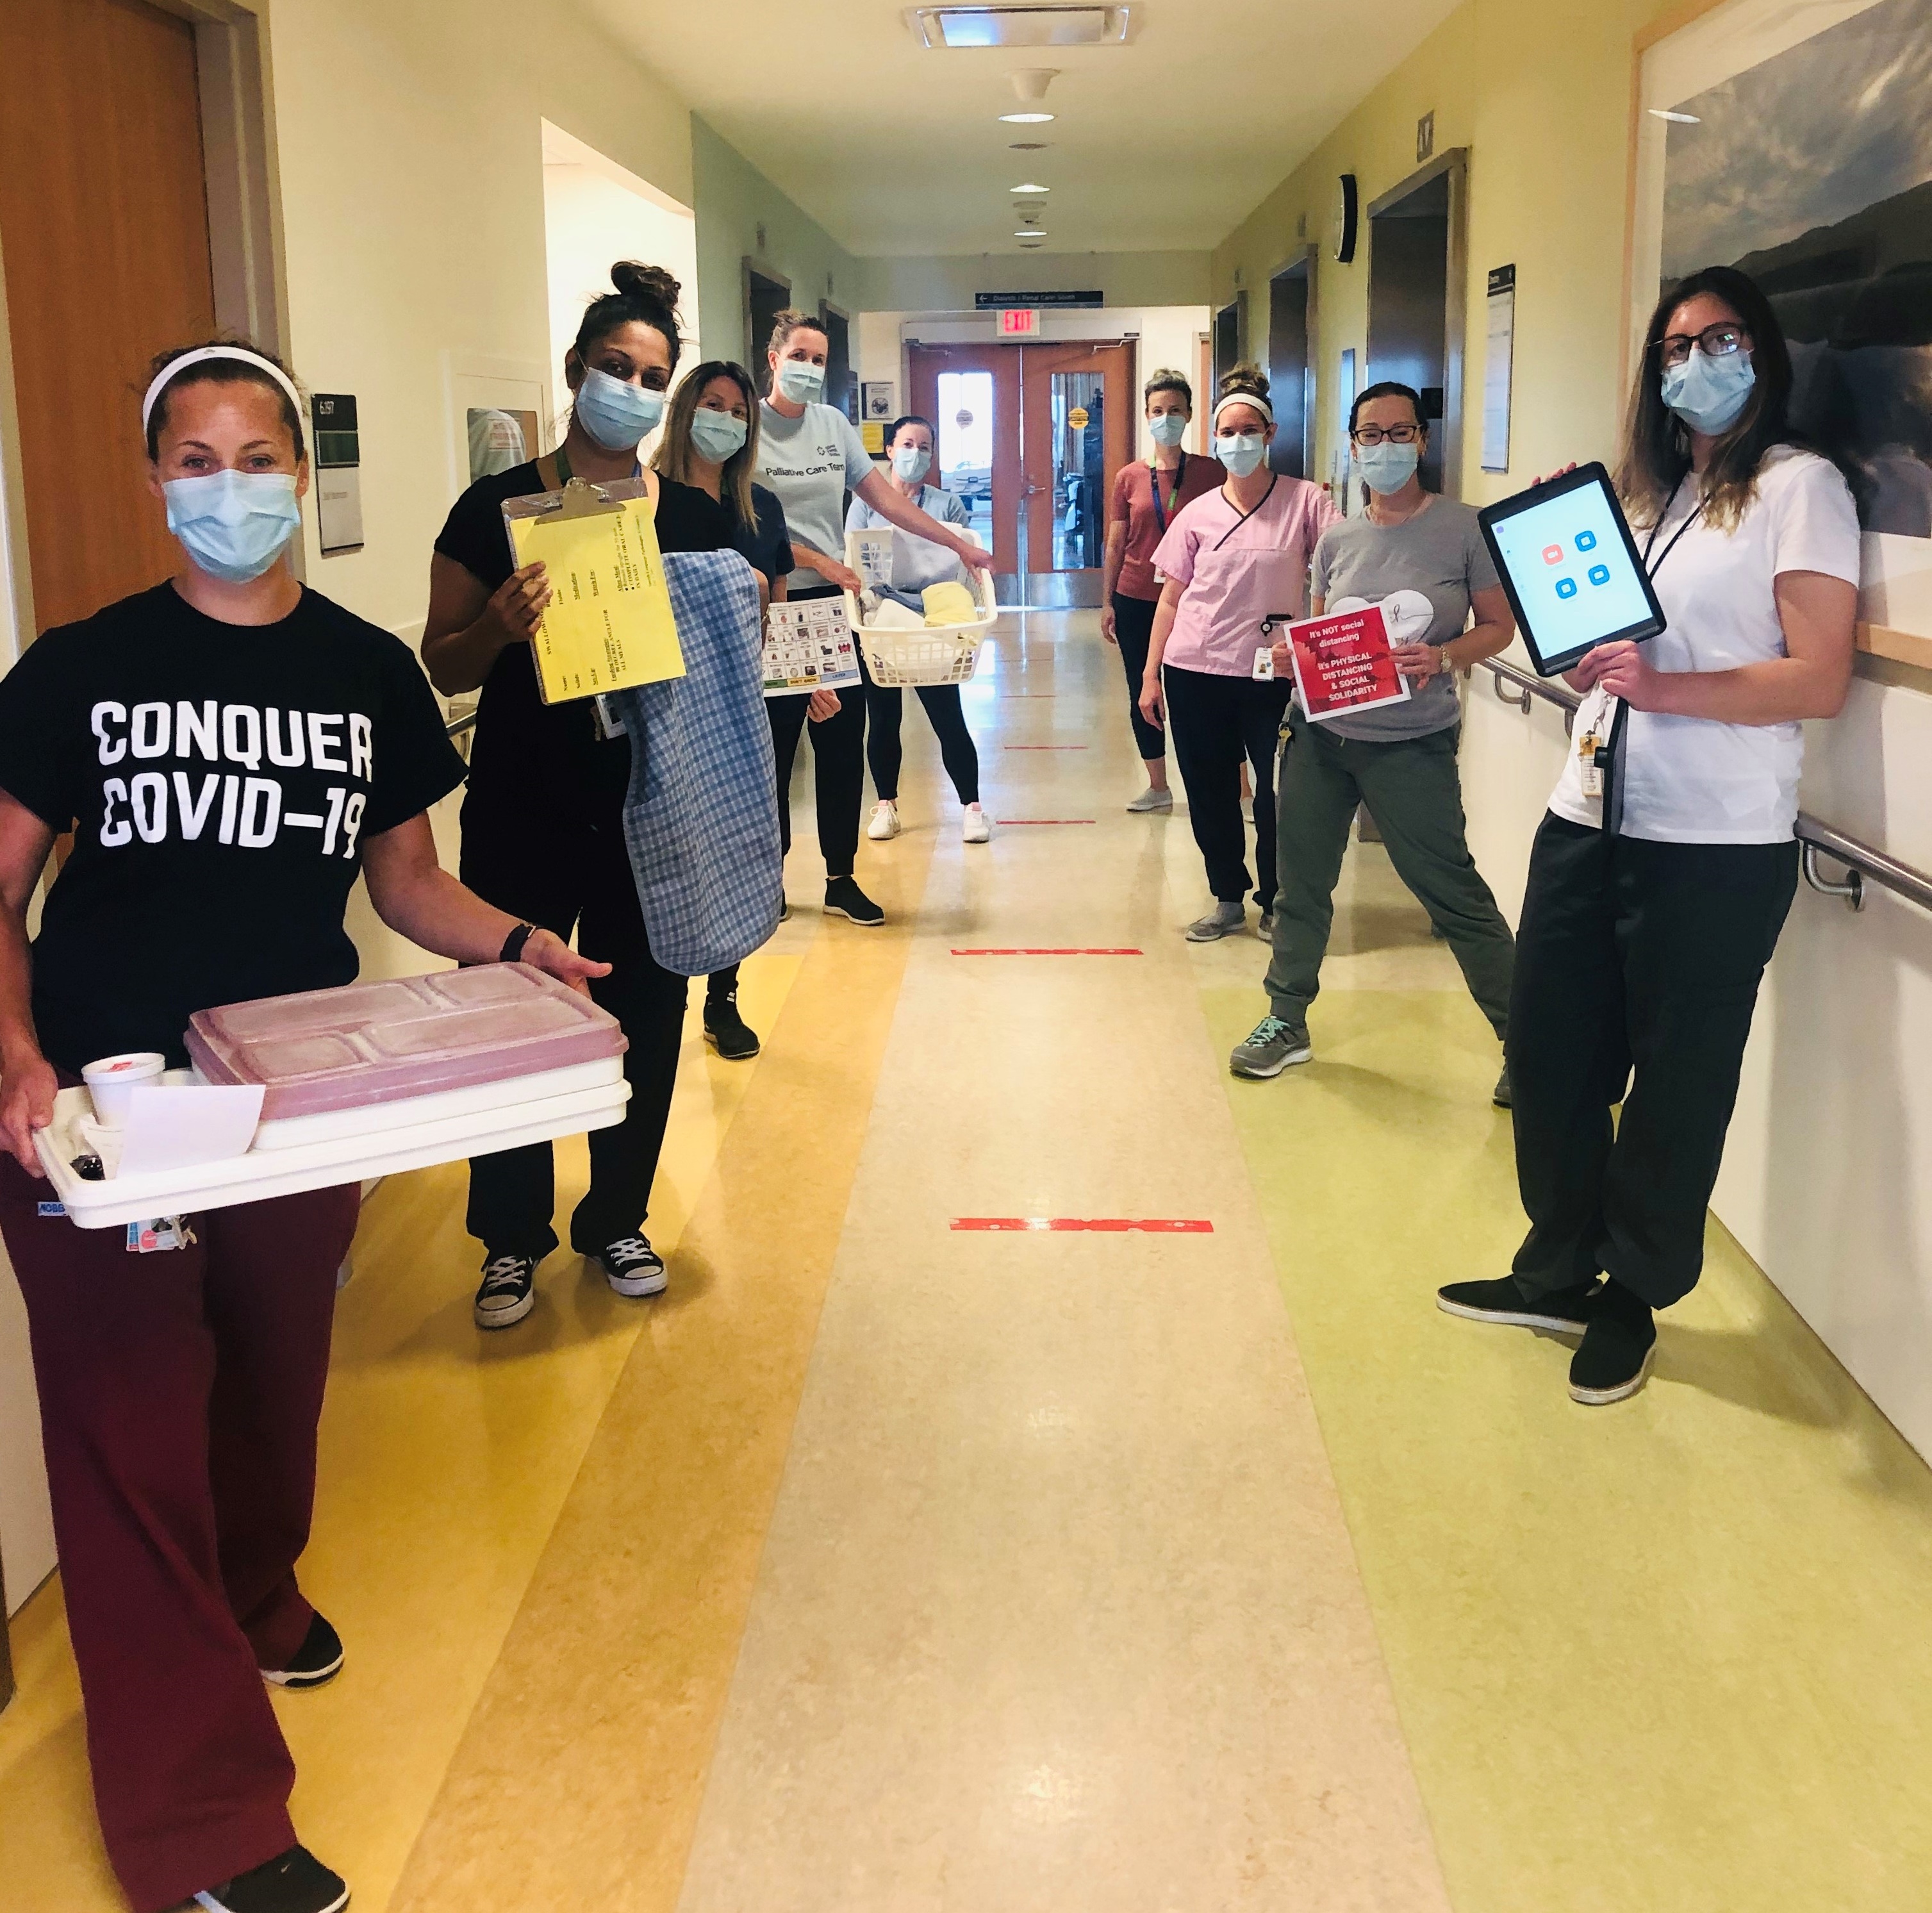 A group of hospital employees standing apart down either side of a hospital hallway. They are holding different objects such as meal trays, iPads laundry basket and looking at the camera.